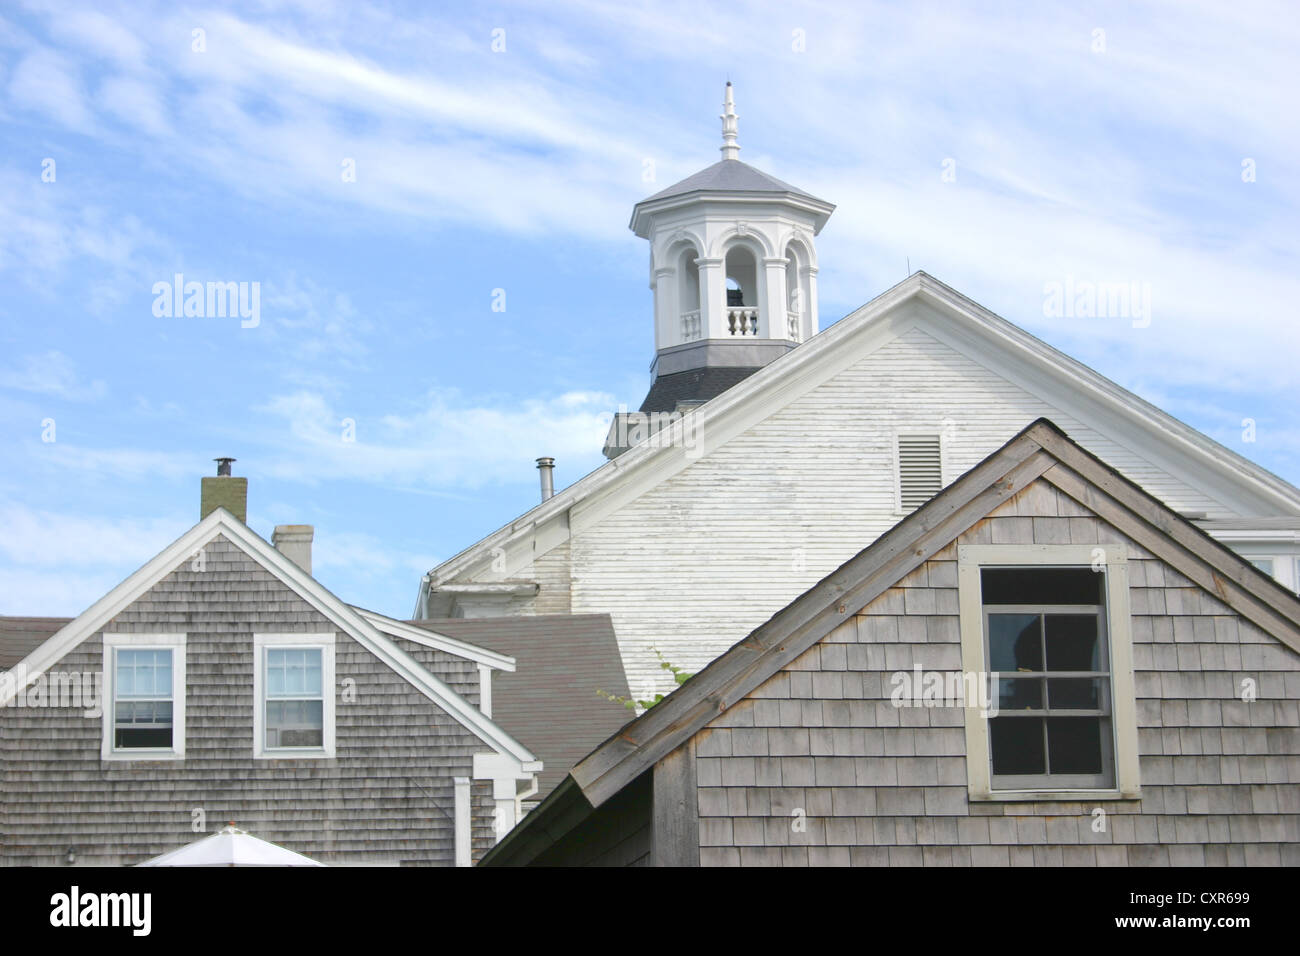 The cupola of the town library in Provincetown, Massachusetts Stock Photo